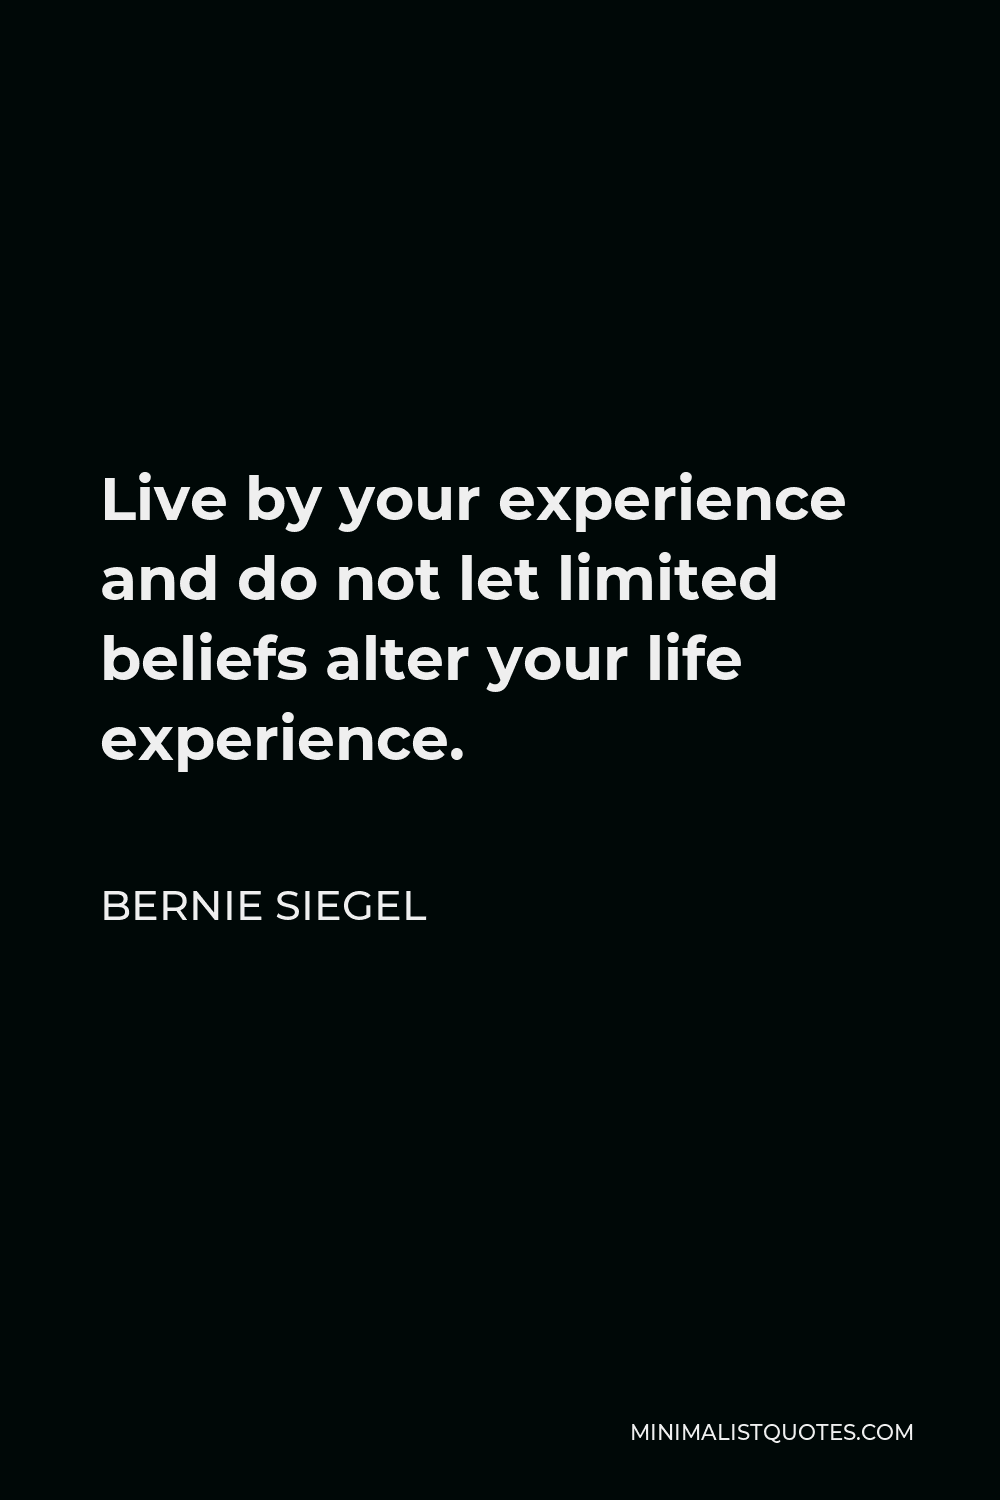 Bernie Siegel Quote - Live by your experience and do not let limited beliefs alter your life experience.